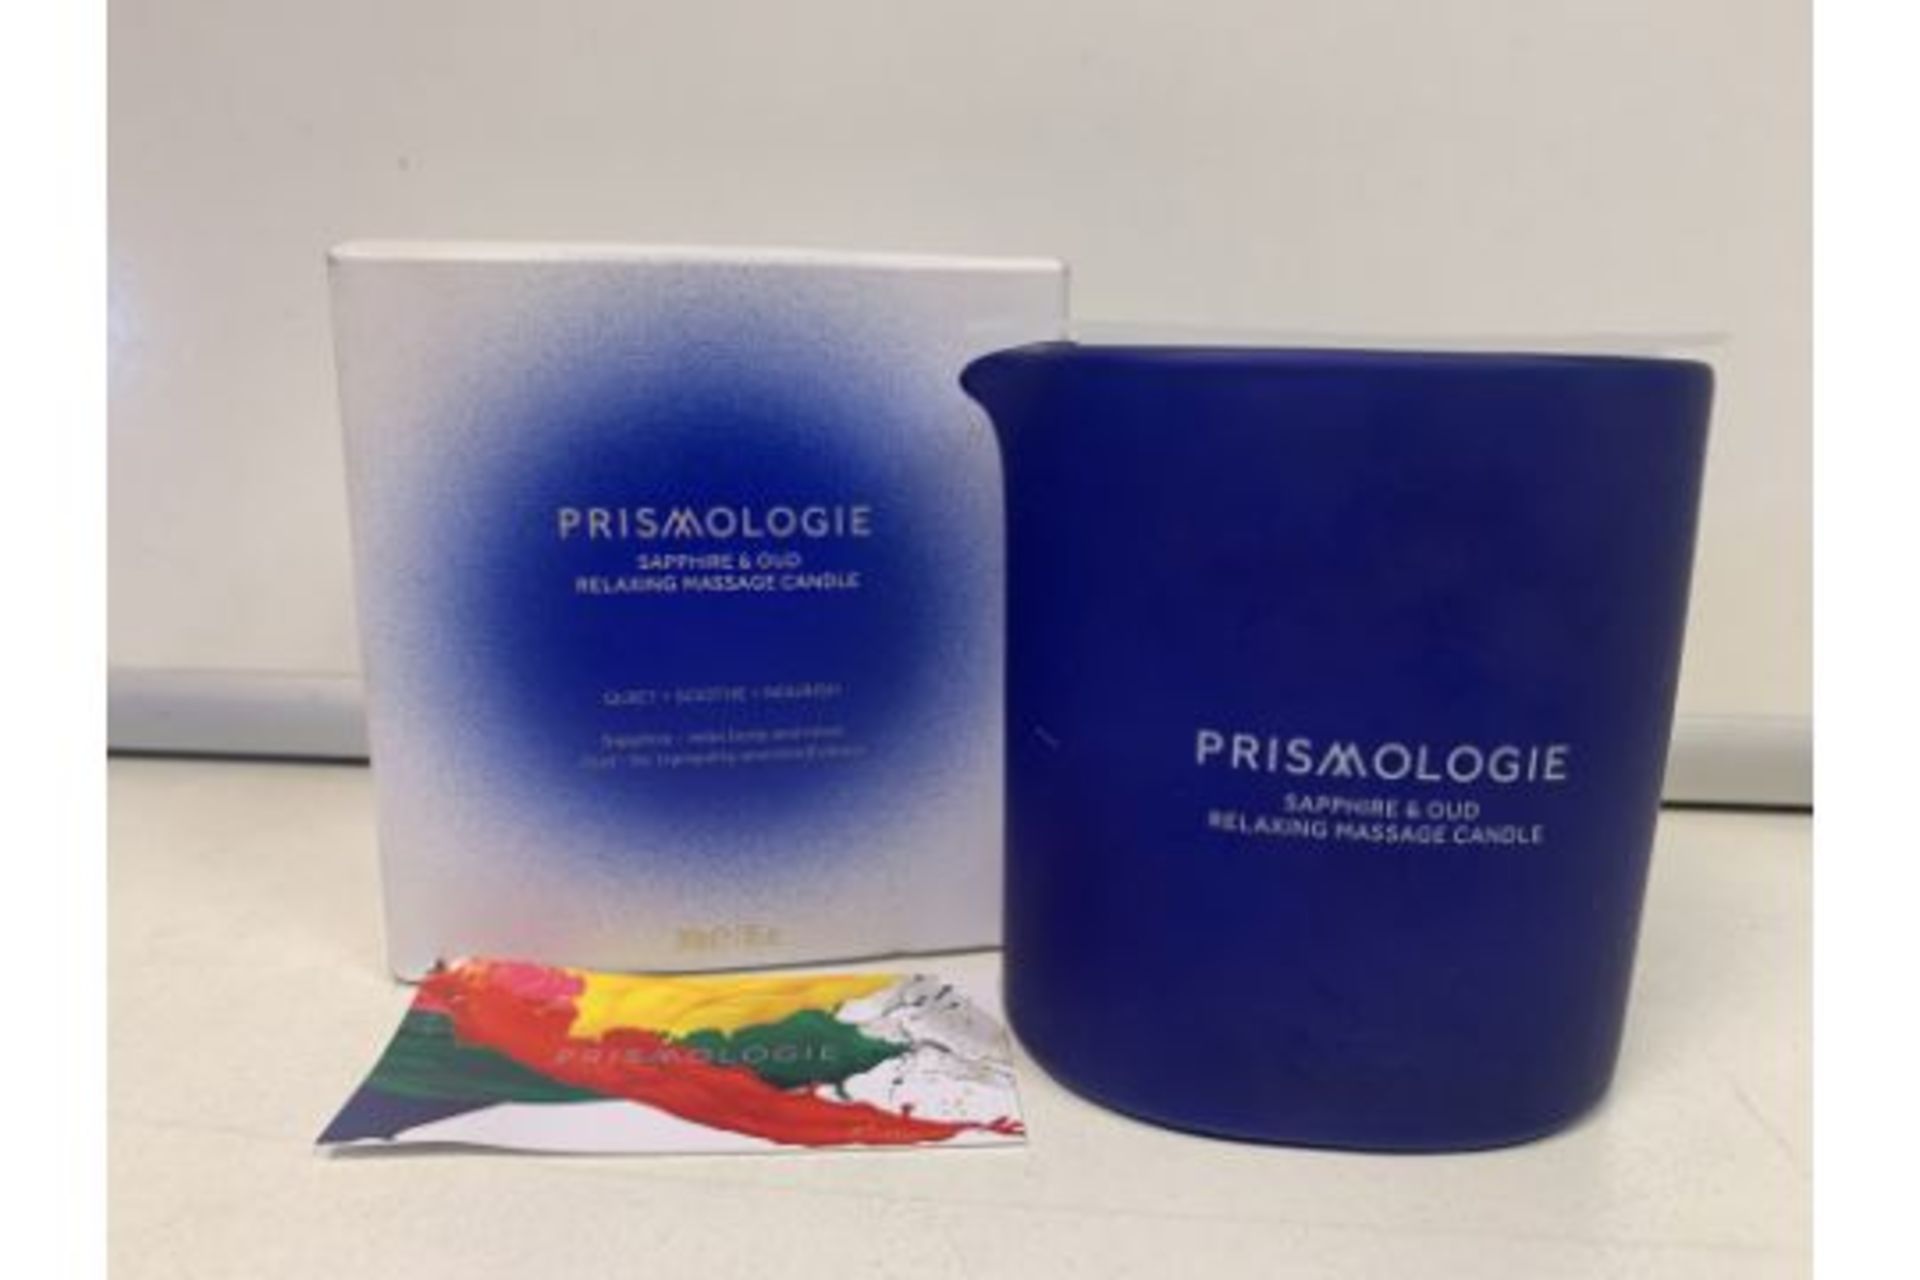 10 X BRAND NEW PRISMOLOGIE SAPHIRE AND OUD 200G MASSAGE CANDLES RRP £49 EACH